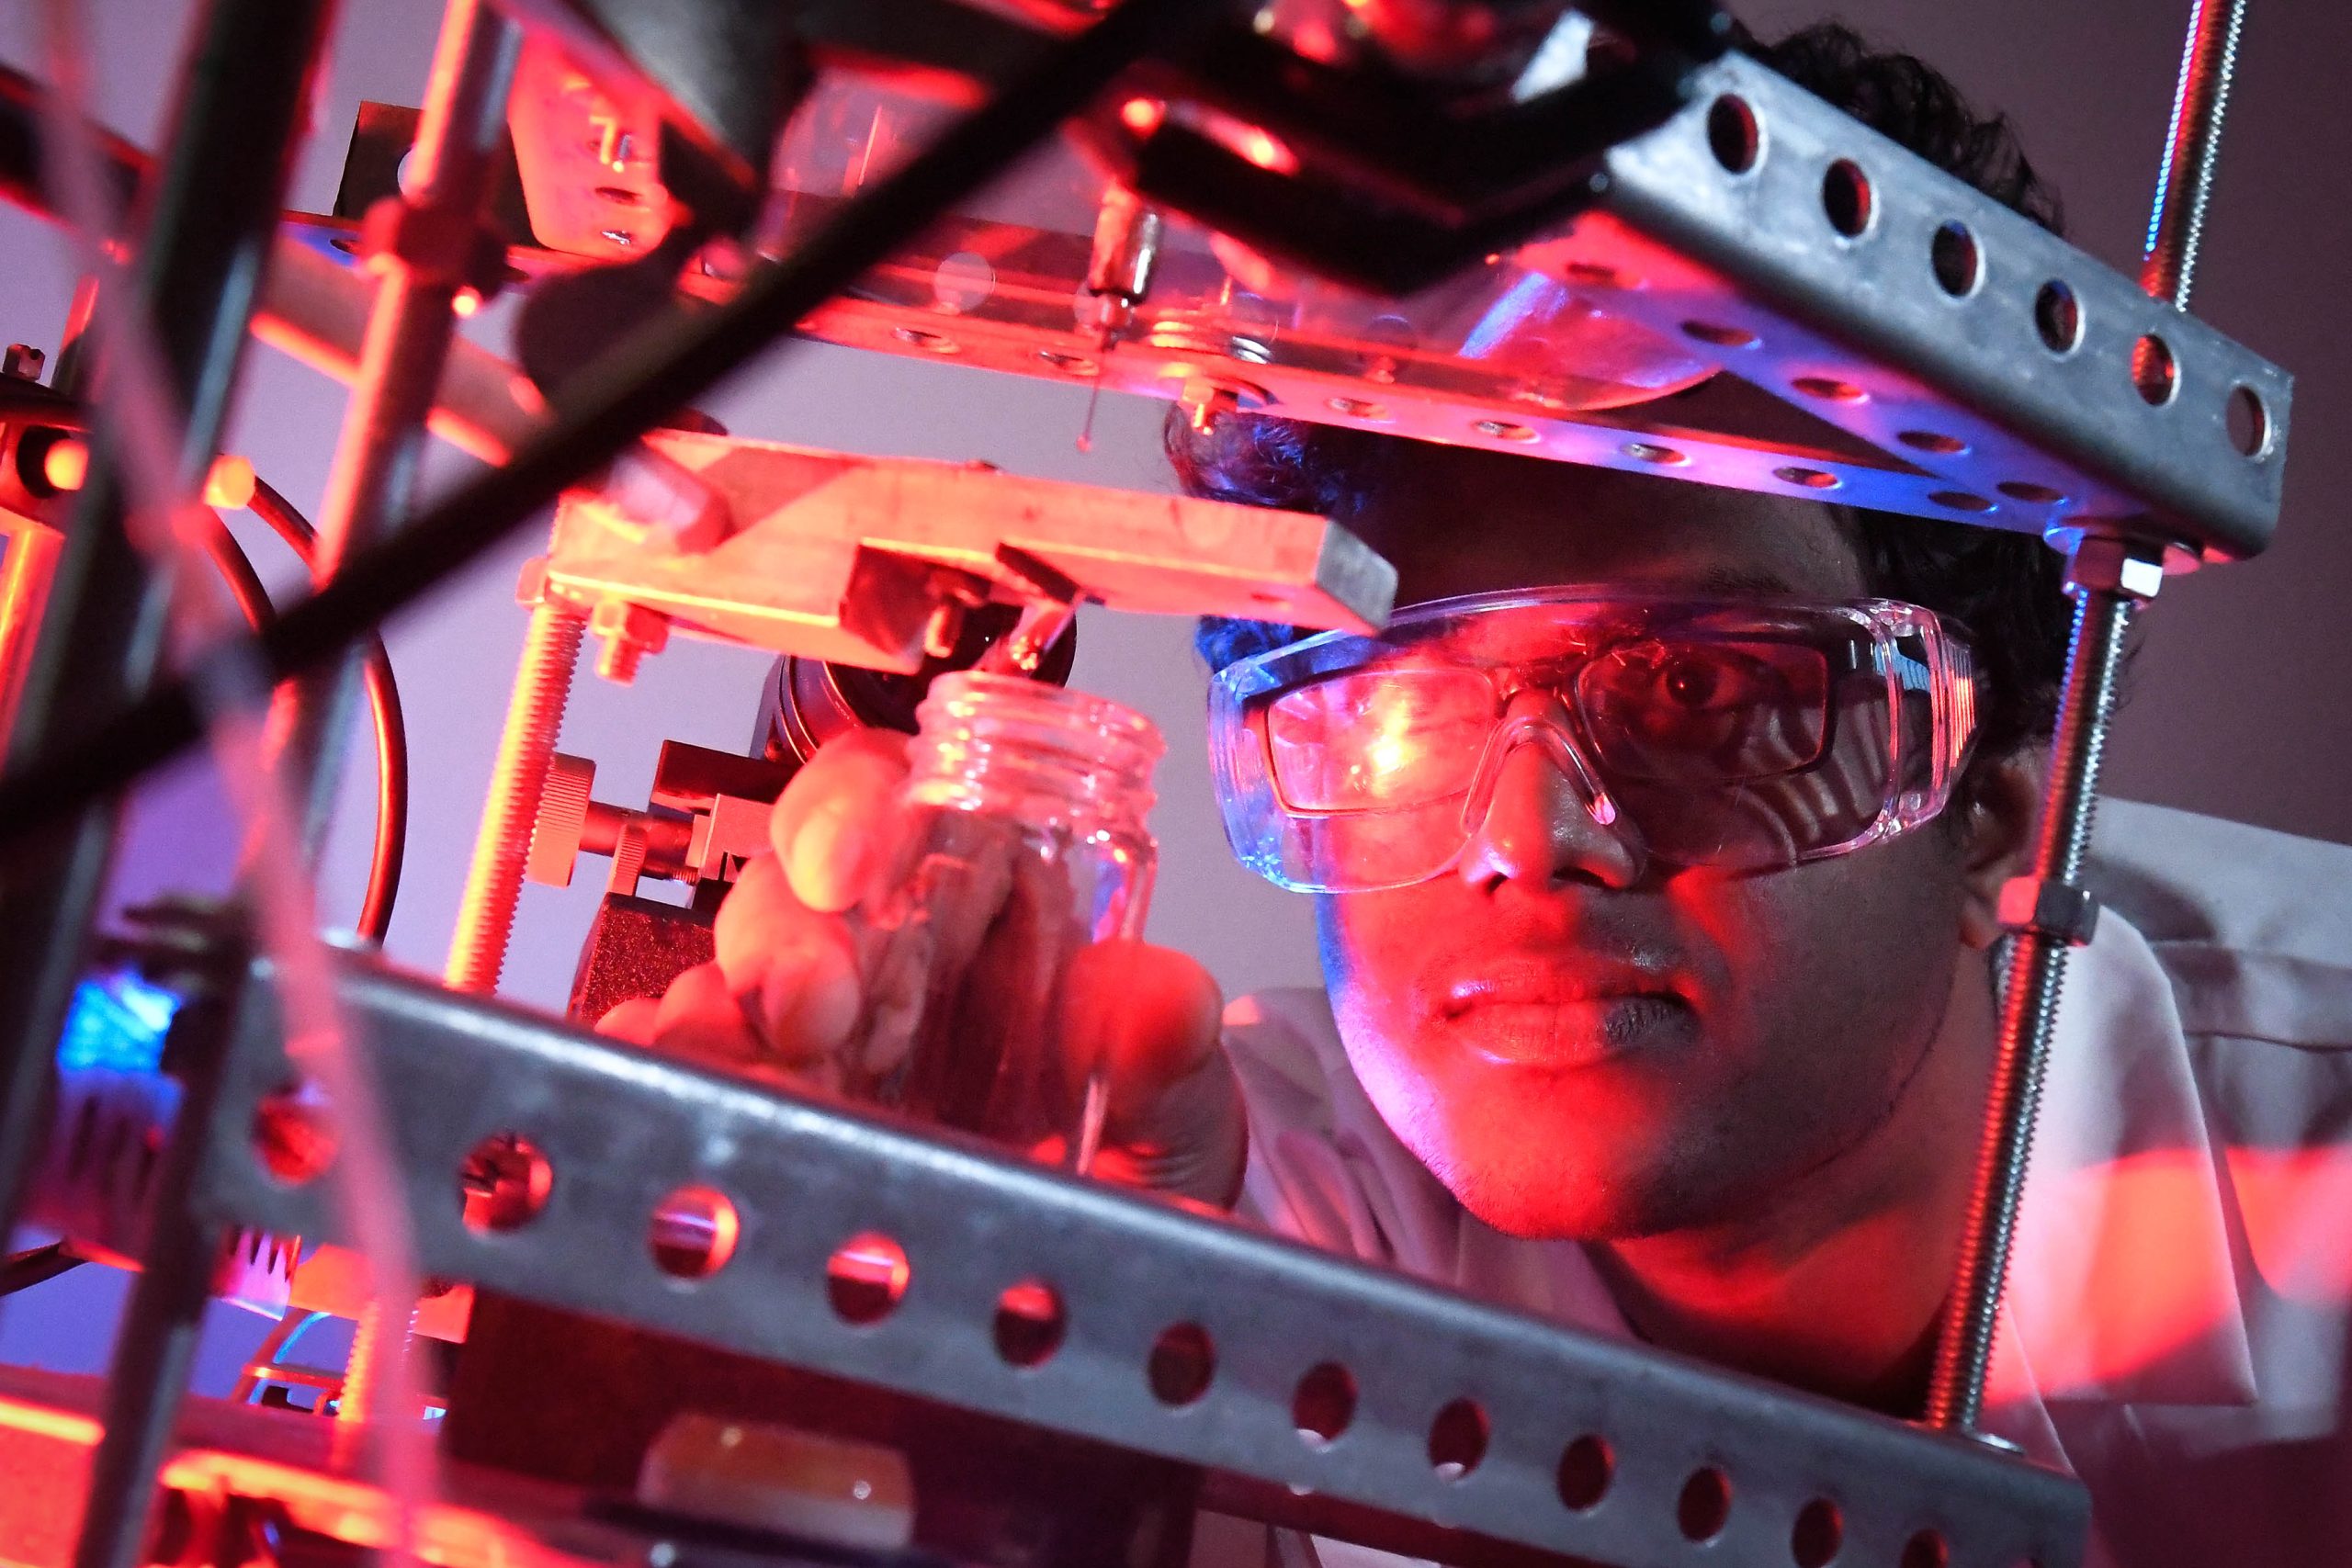 a student in a lab coat and glasses uses lab equipment under red lighting